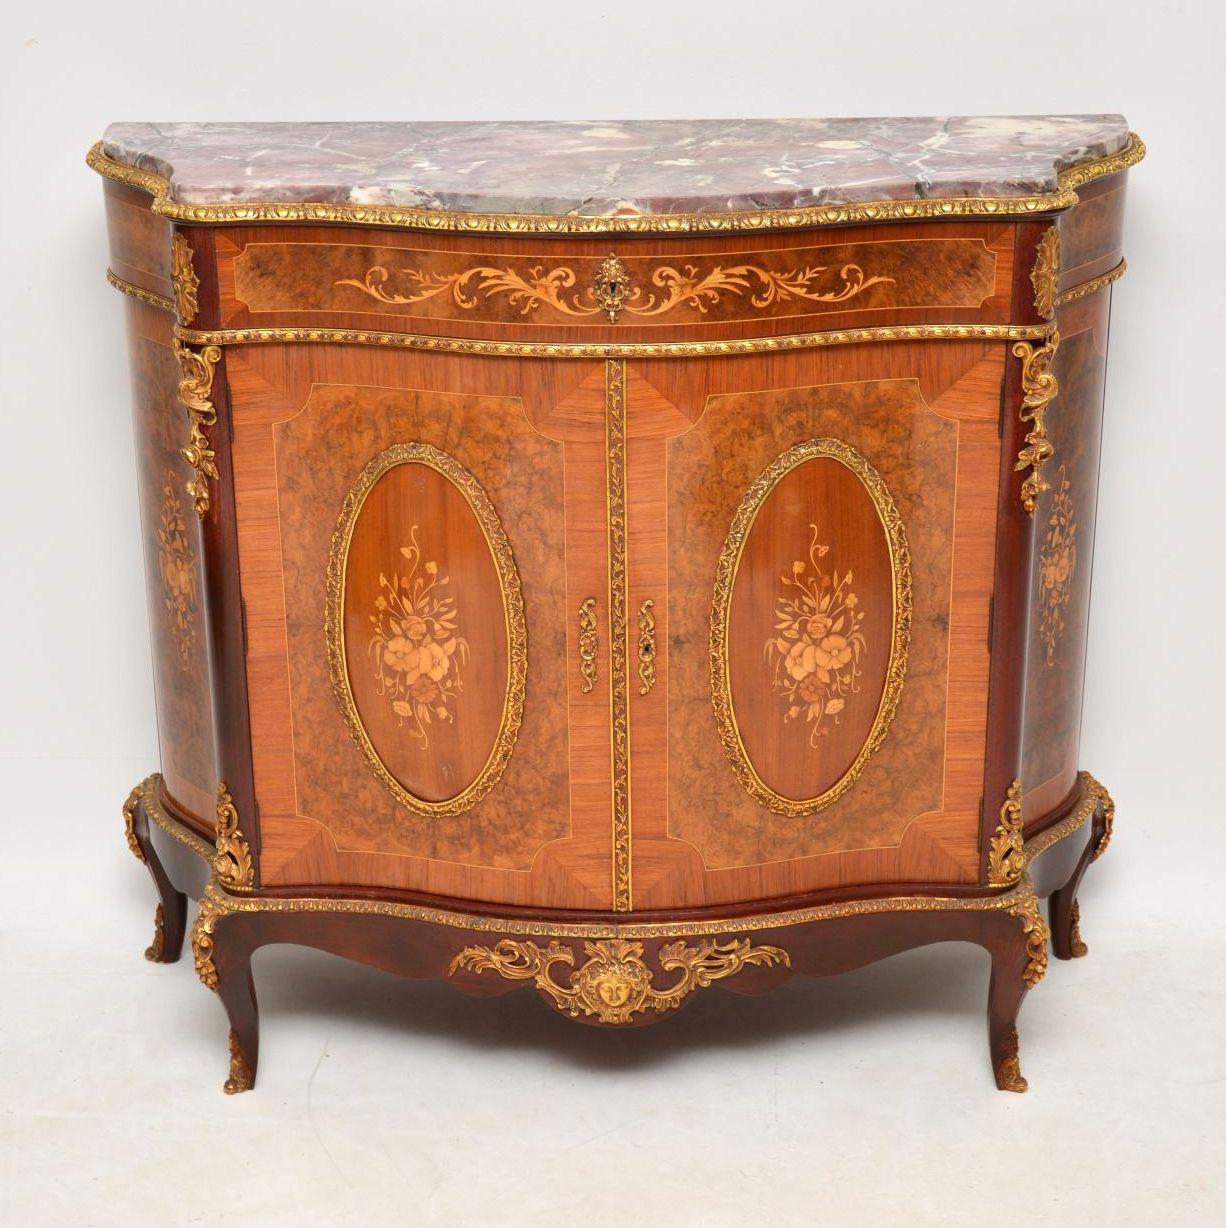 This antique French style marble top cabinet is of very high quality and very colorful too. I would date it to around the 1930s period and it’s in good original condition. The marble top which has lovely patterns looks like it’s been repaired